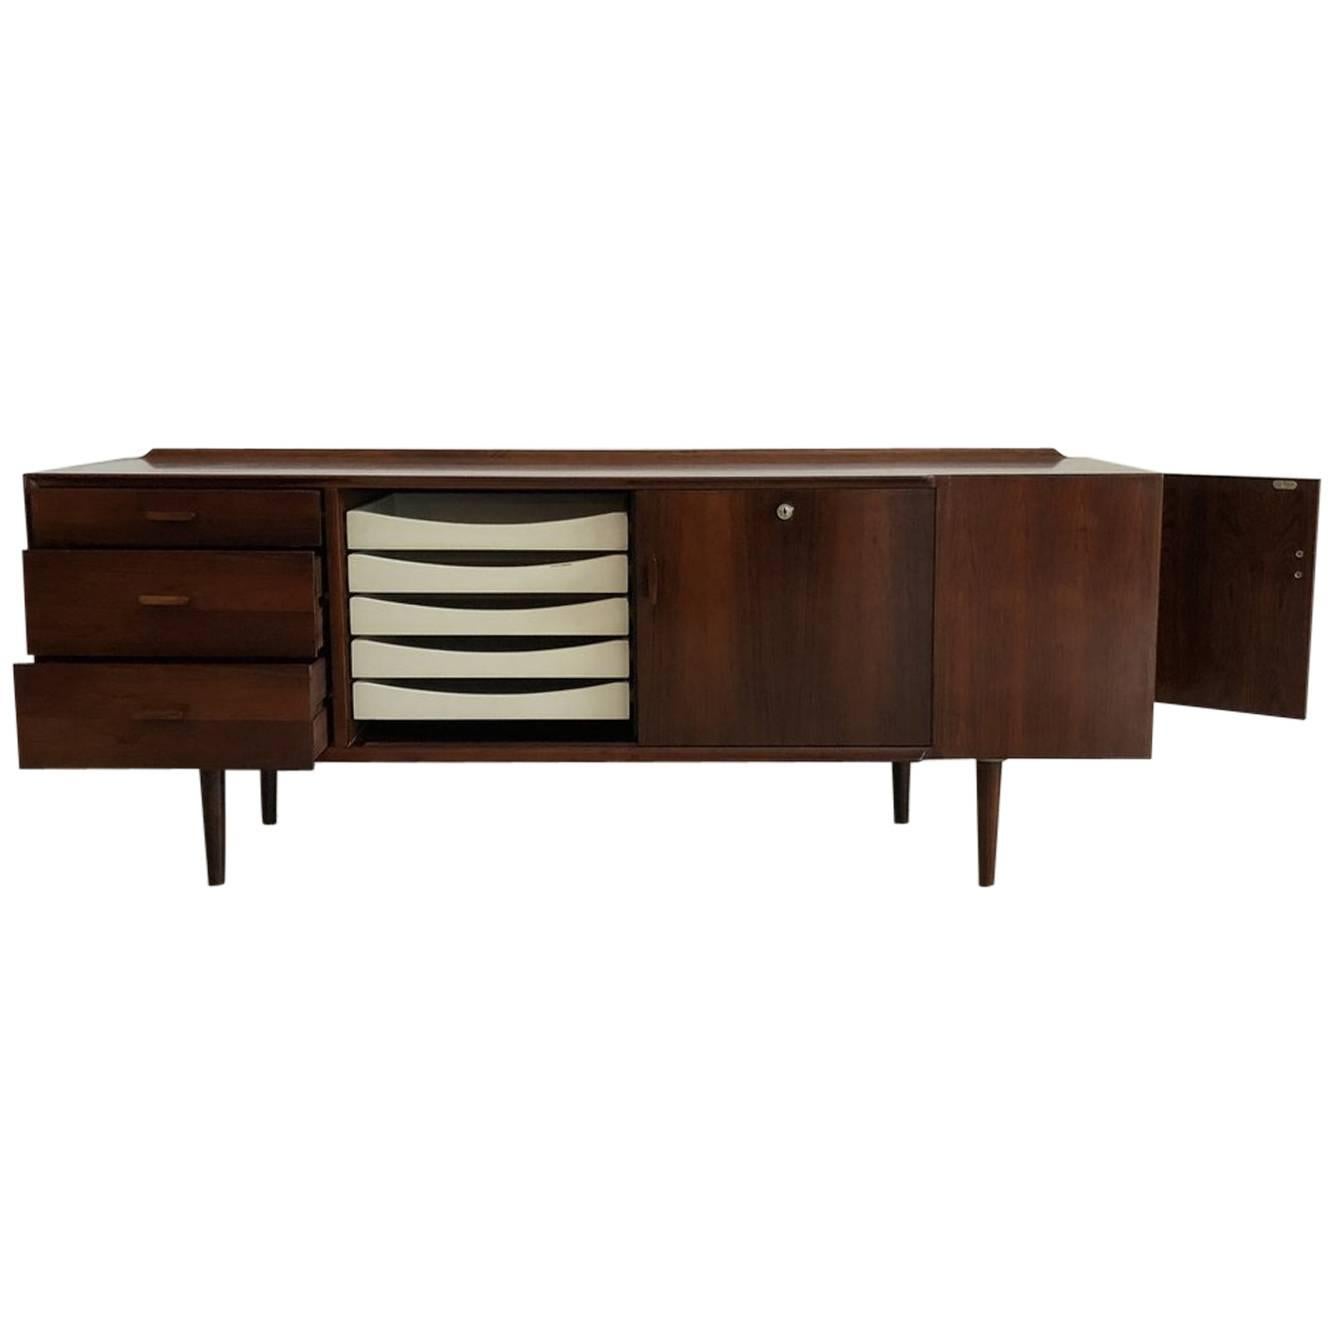 Super amazing Arne Vodder for Sibast rosewood sideboard, made in Denmark, circa 1950s. Stunning!

Has adjustable shelves in cubbies and five white signature “Vodder” drawers. Sliding doors on front. Hidden side cubby. Finished on all sides. Solid